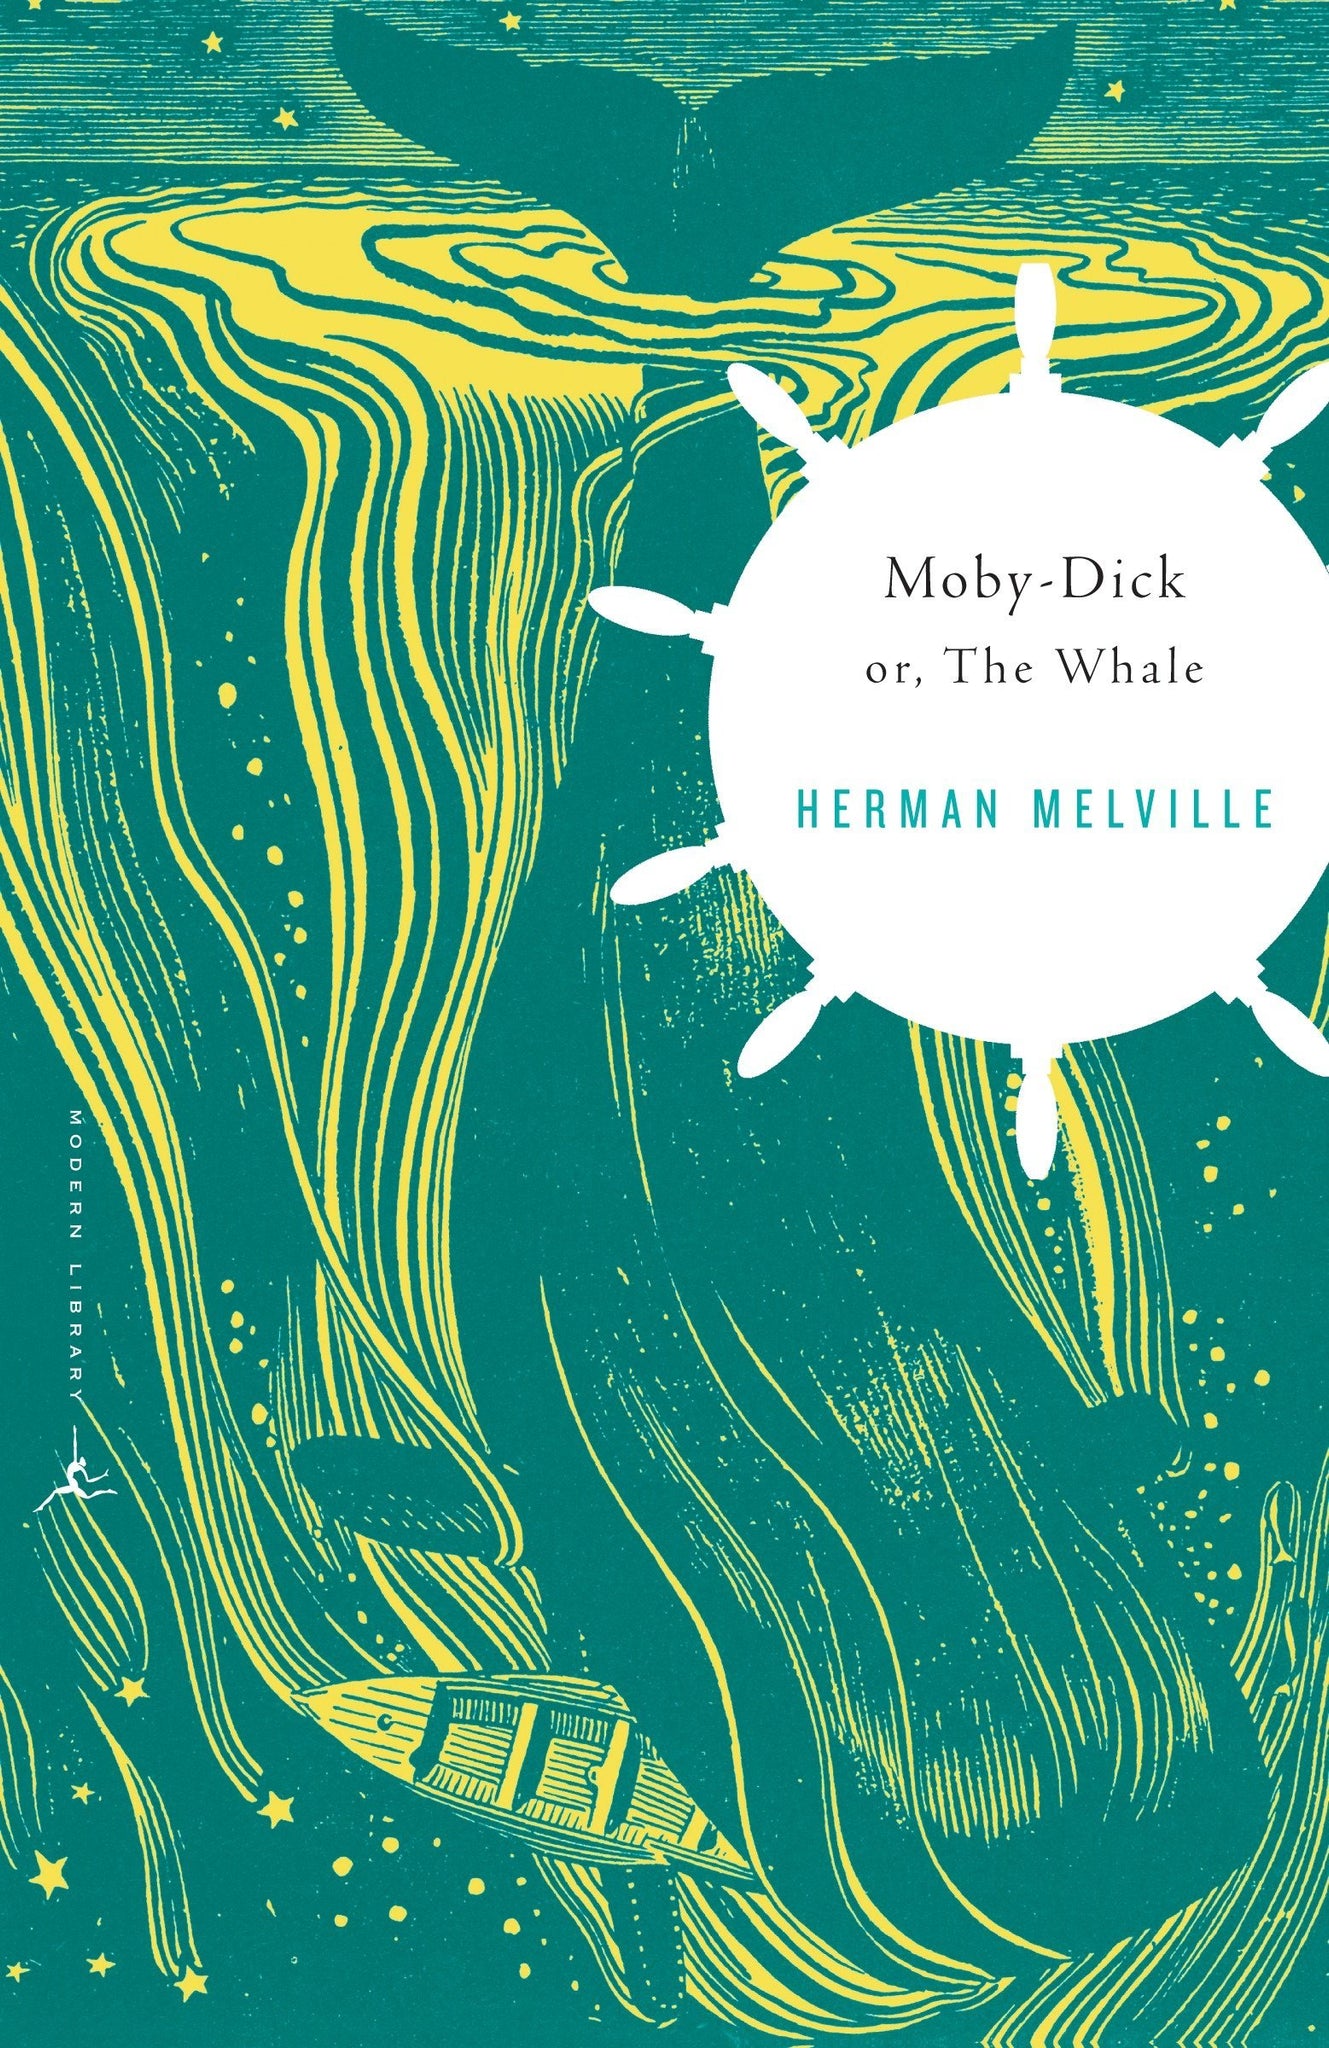 Moby-Dick: Or, the Whale by Herman Melville